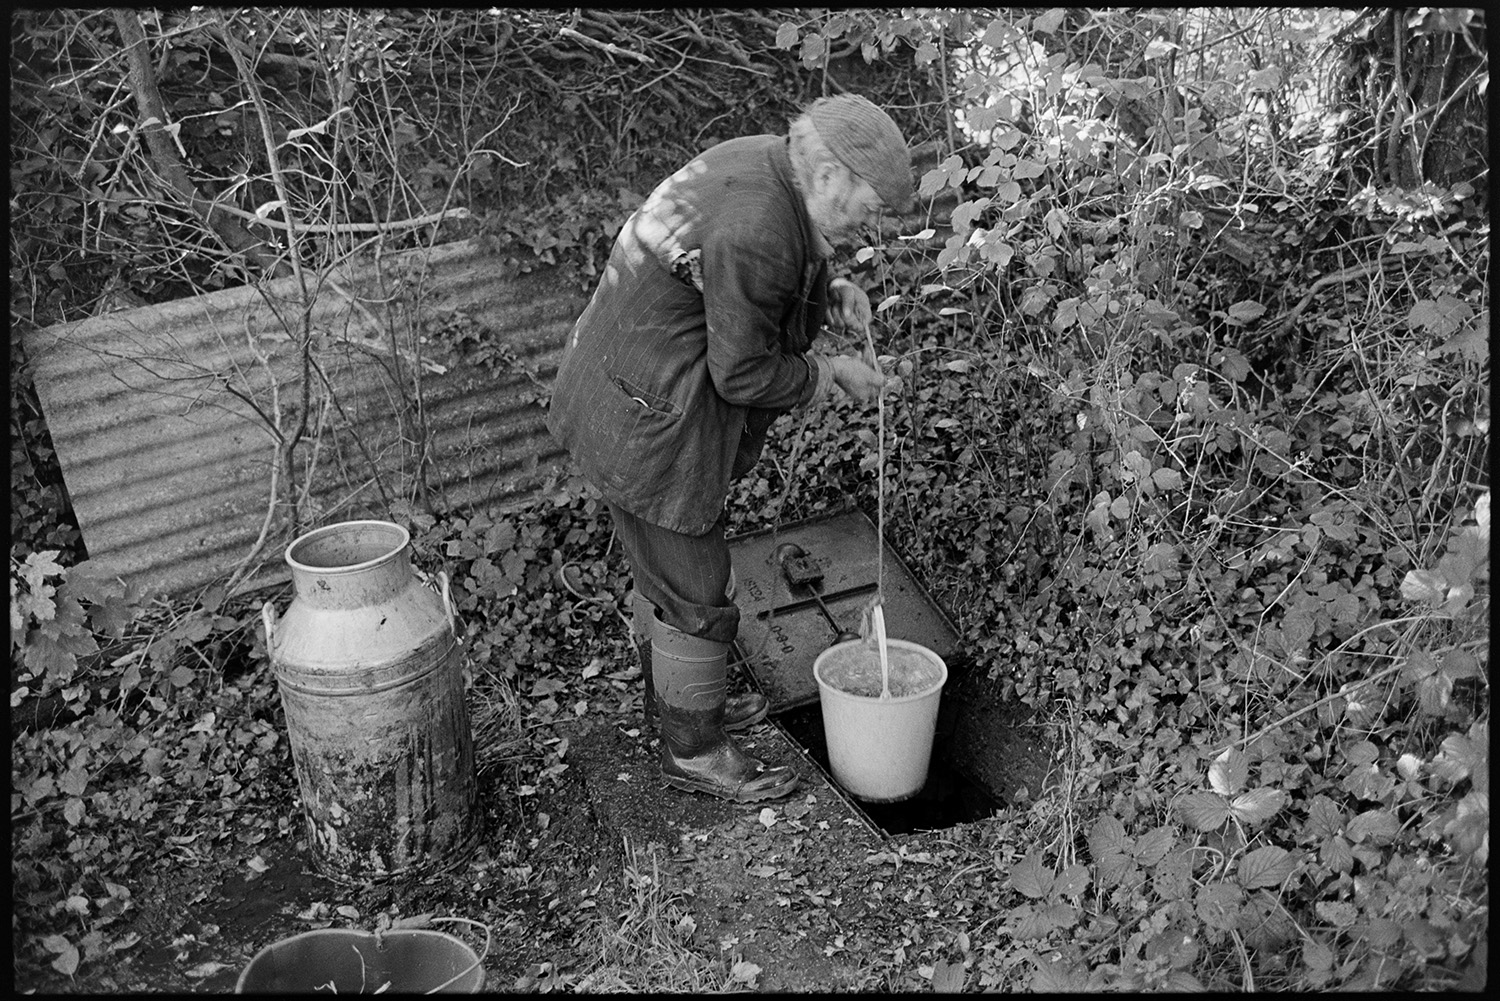 Farmer drawing water from well with bucket and filling churn. 
[Reg Holland drawing water from a well using a bucket, at Newhouse, Ashreigney. He is using the water to fill a churn behind him.]